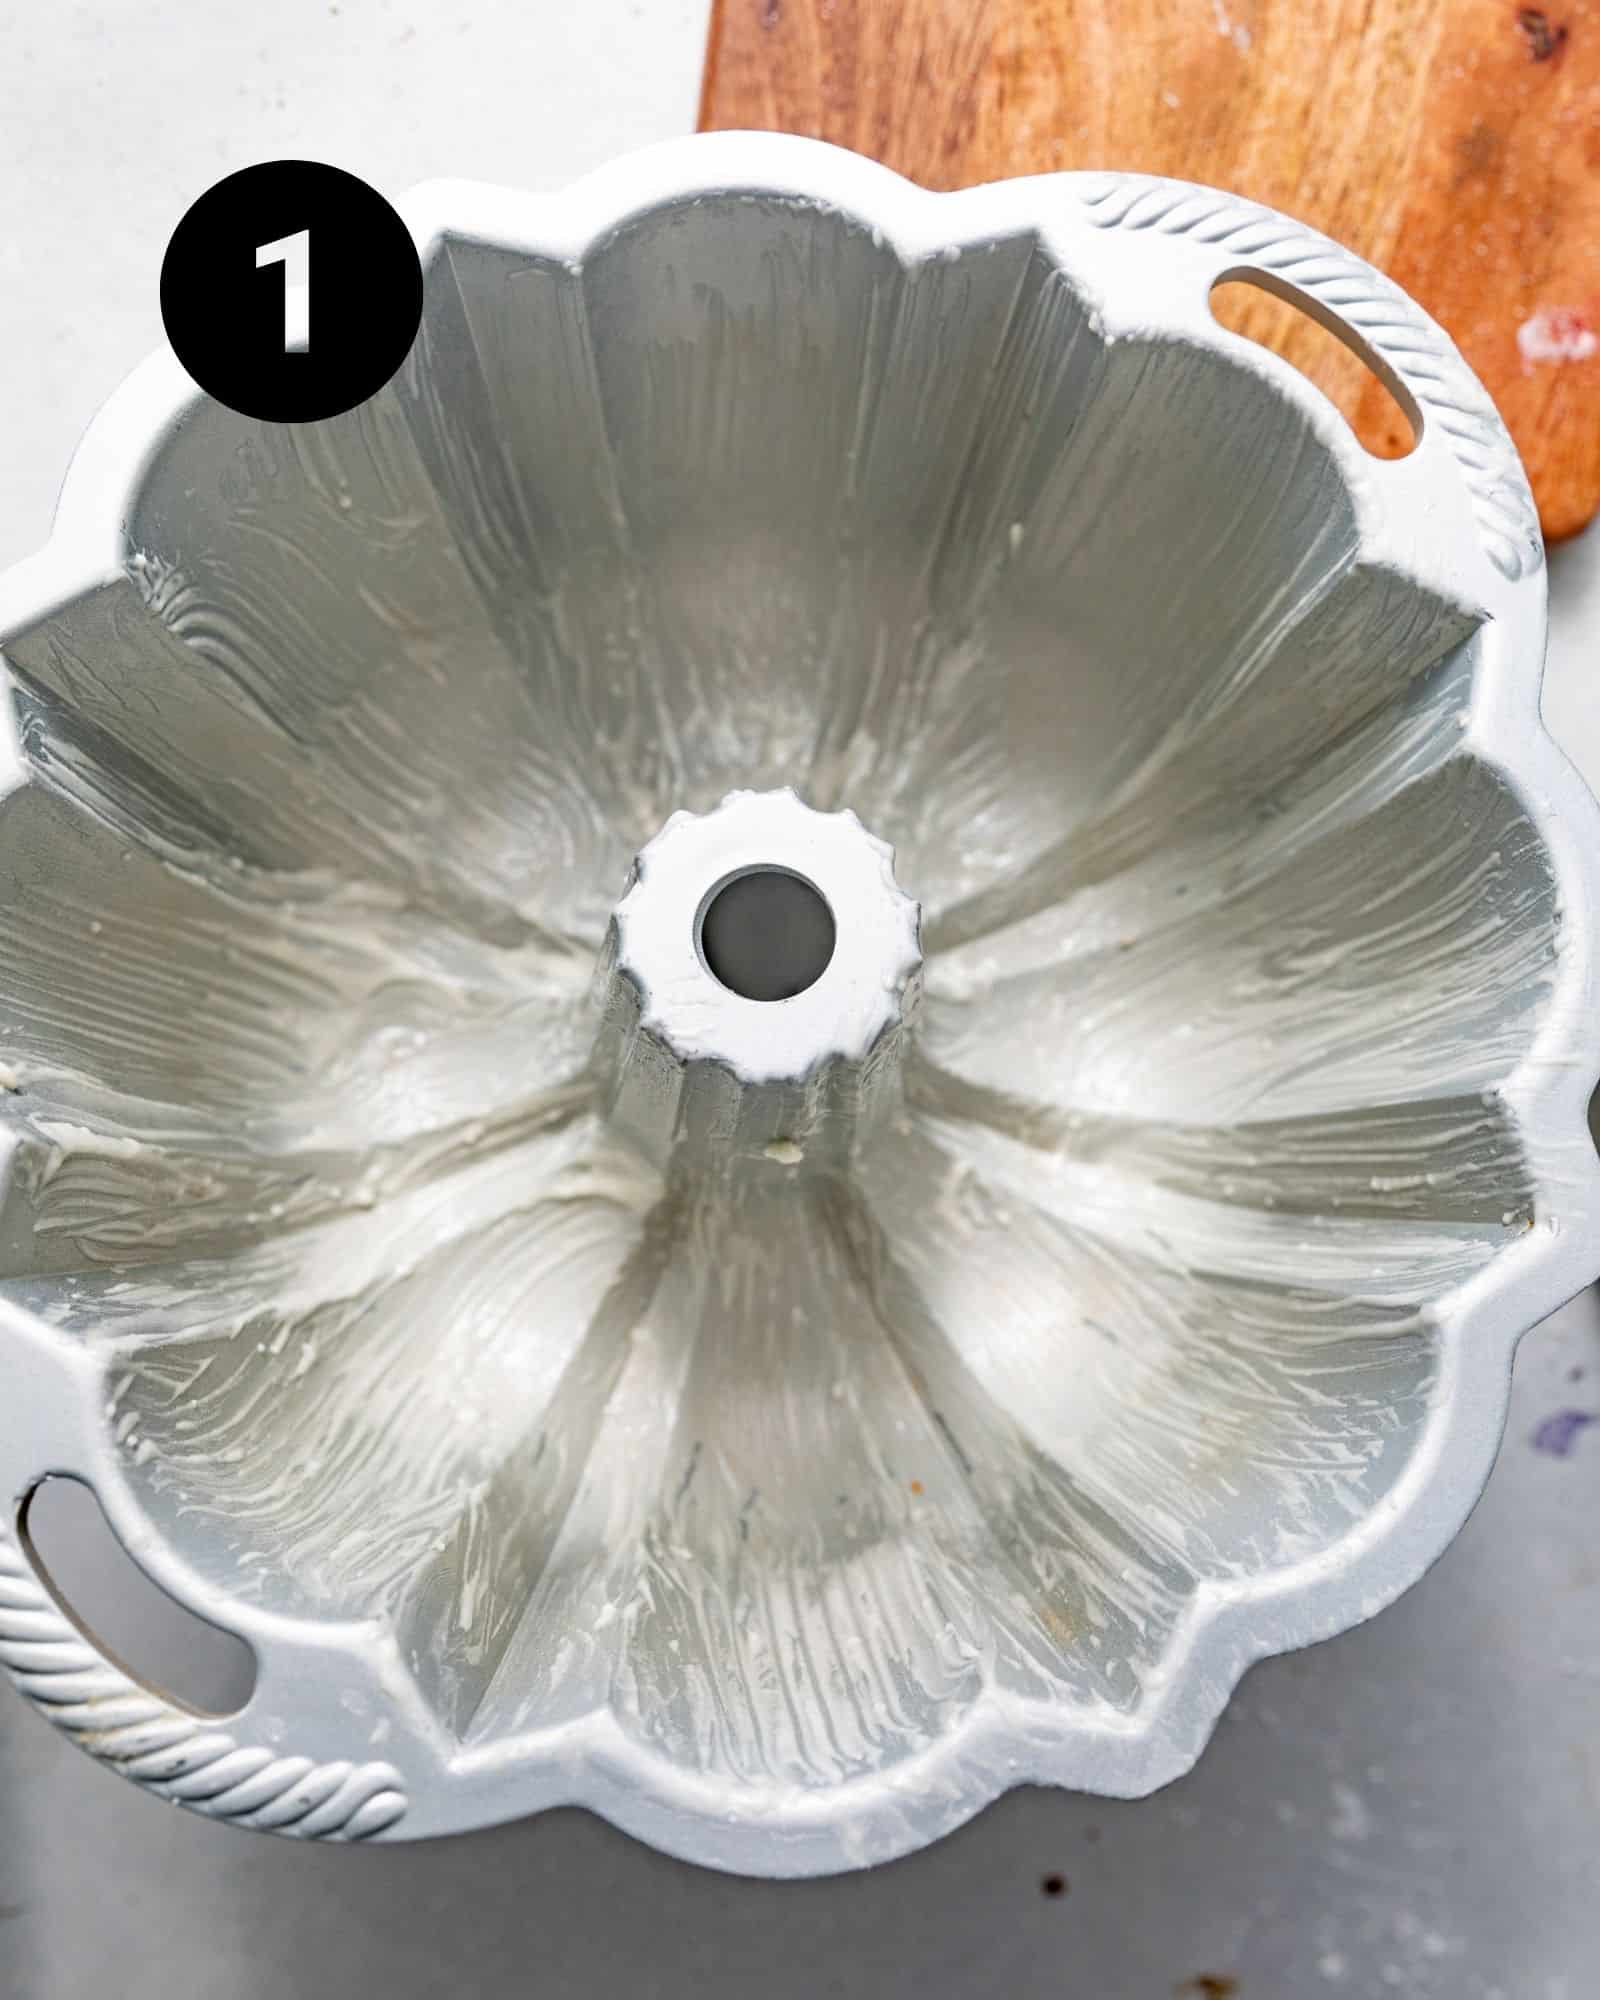 a bundt pan greased with nonstick baking spray.